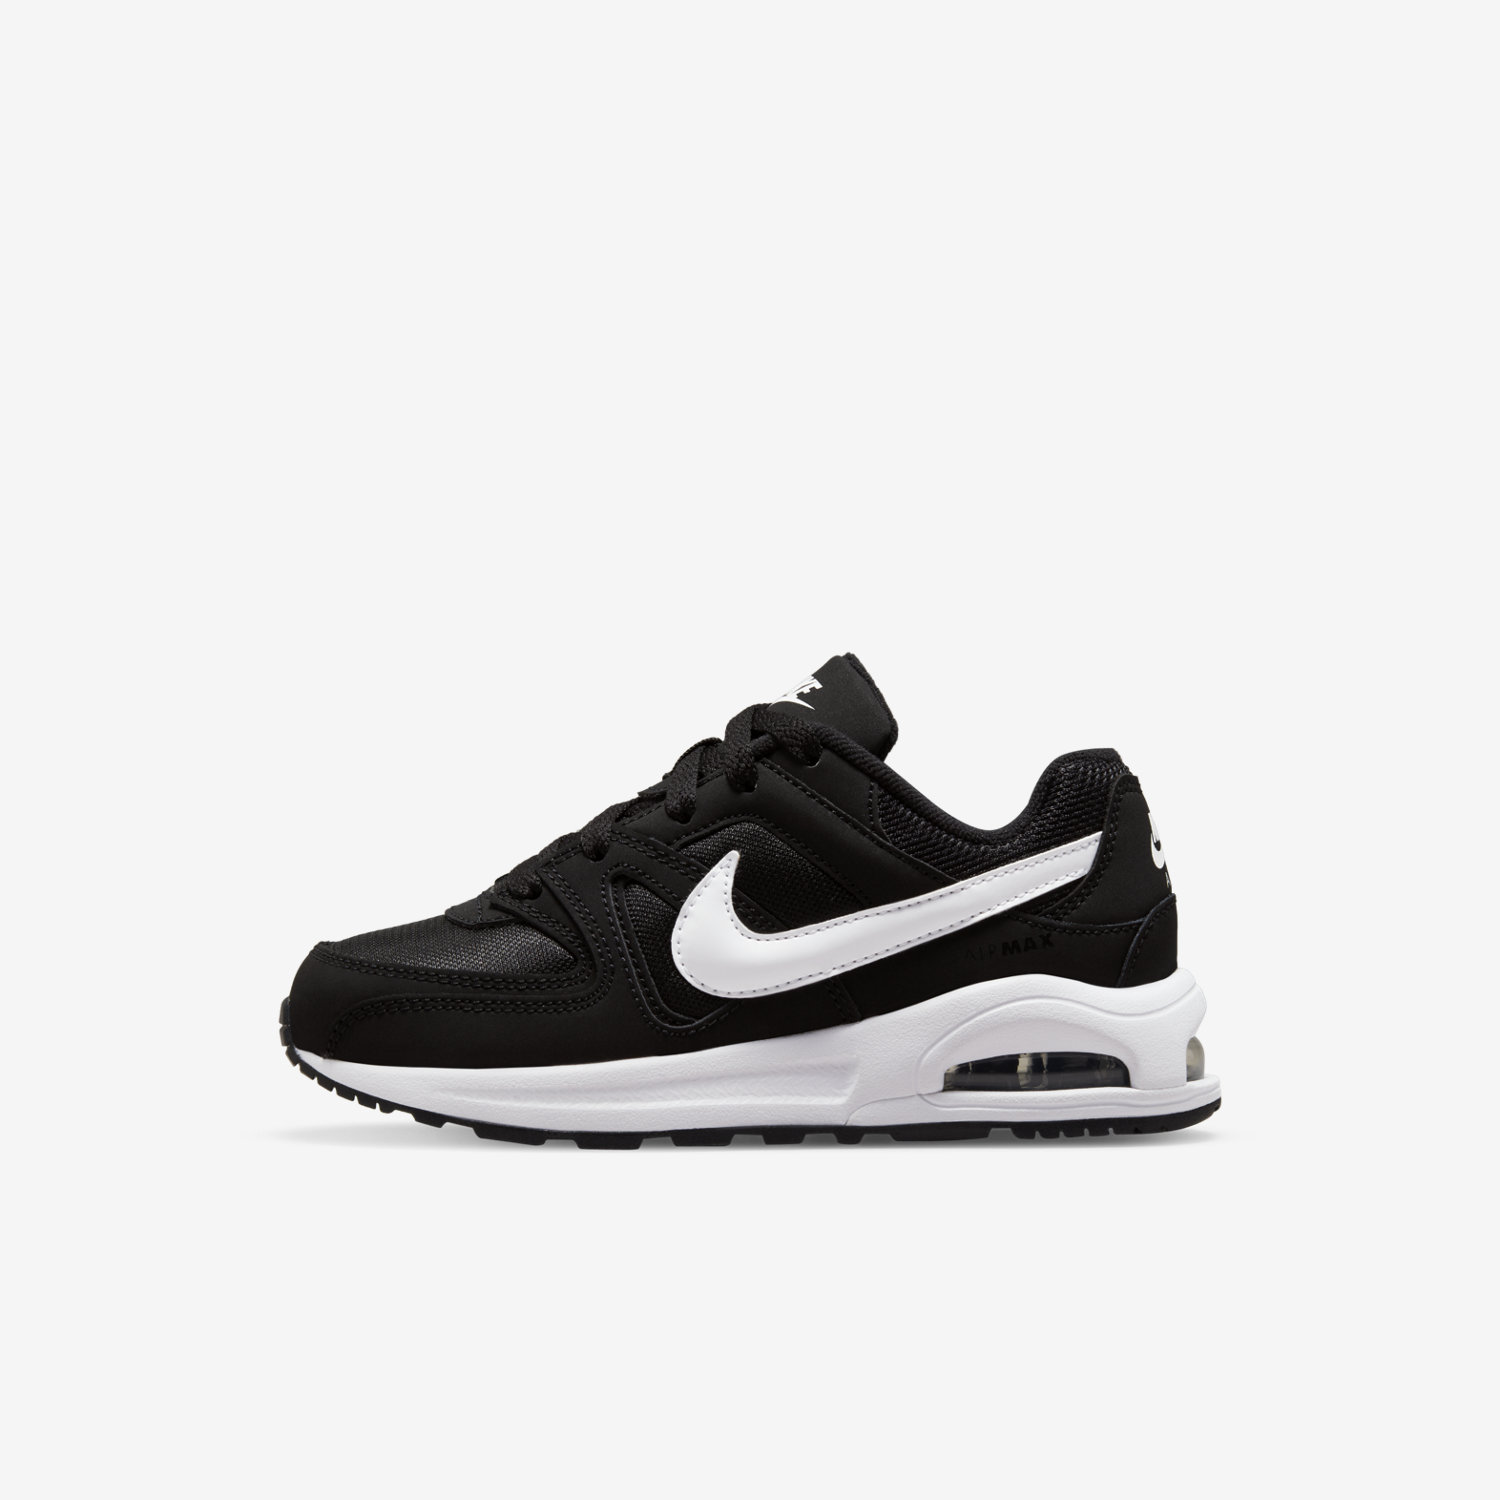 Nike Air Max Command Flex - Younger Kids' Shoe